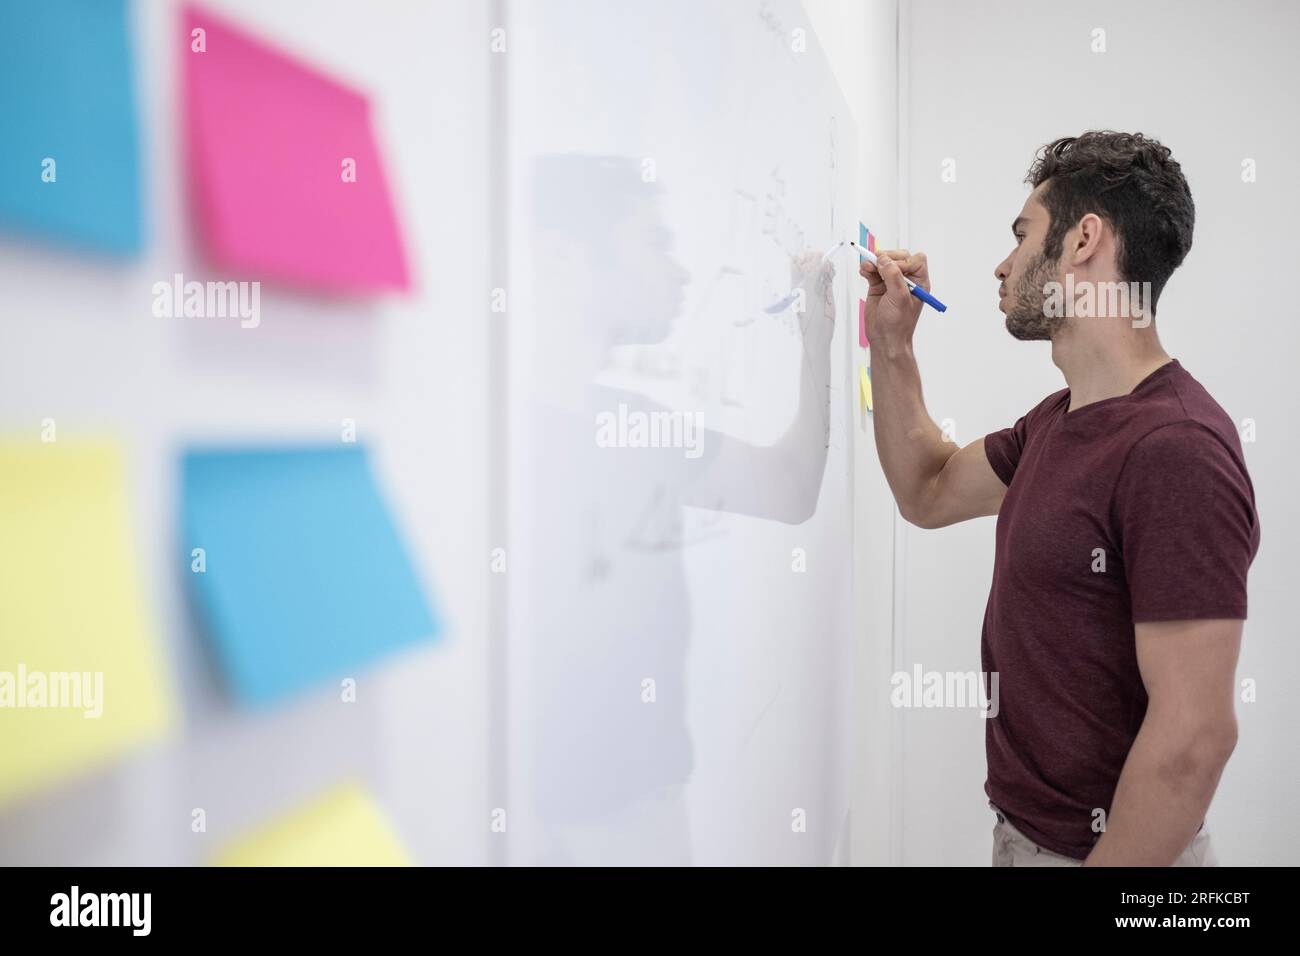 Man giving a presentation on a whiteboard Stock Photo